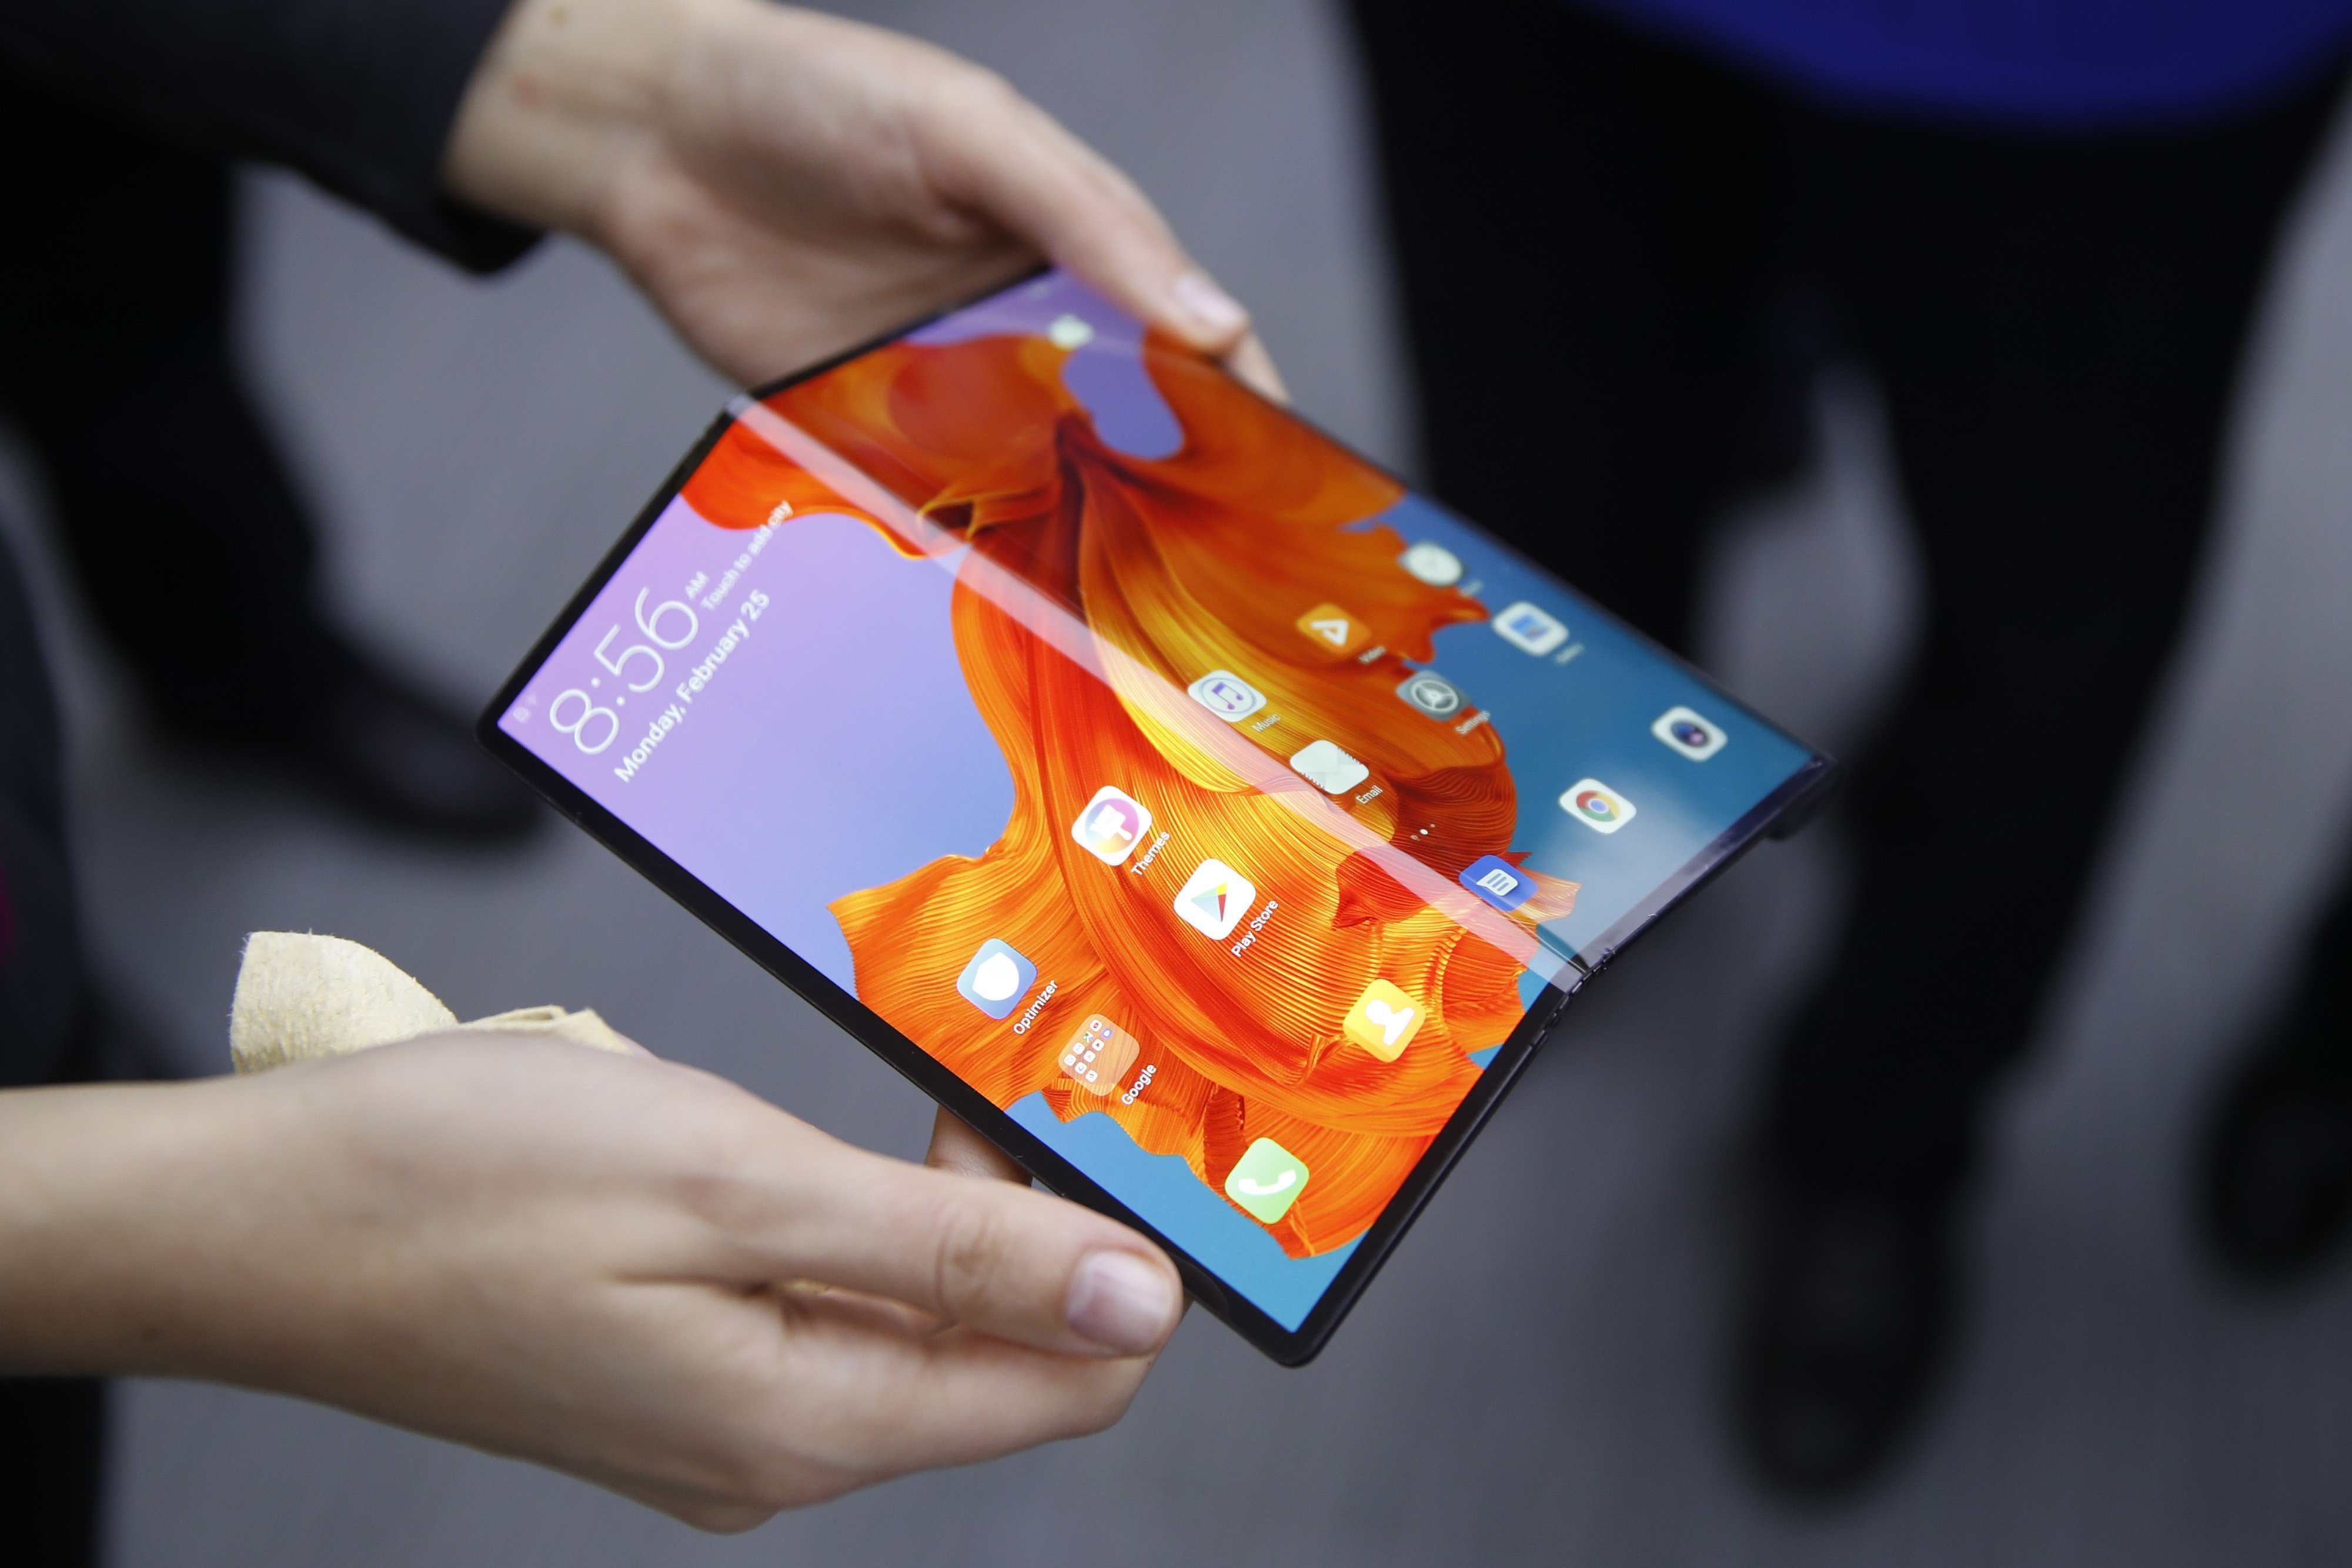 Huawei says the Mate X software adjusts smoothly between smartphone and tablet mode. Photo: Stefan Wermuth / Bloomberg